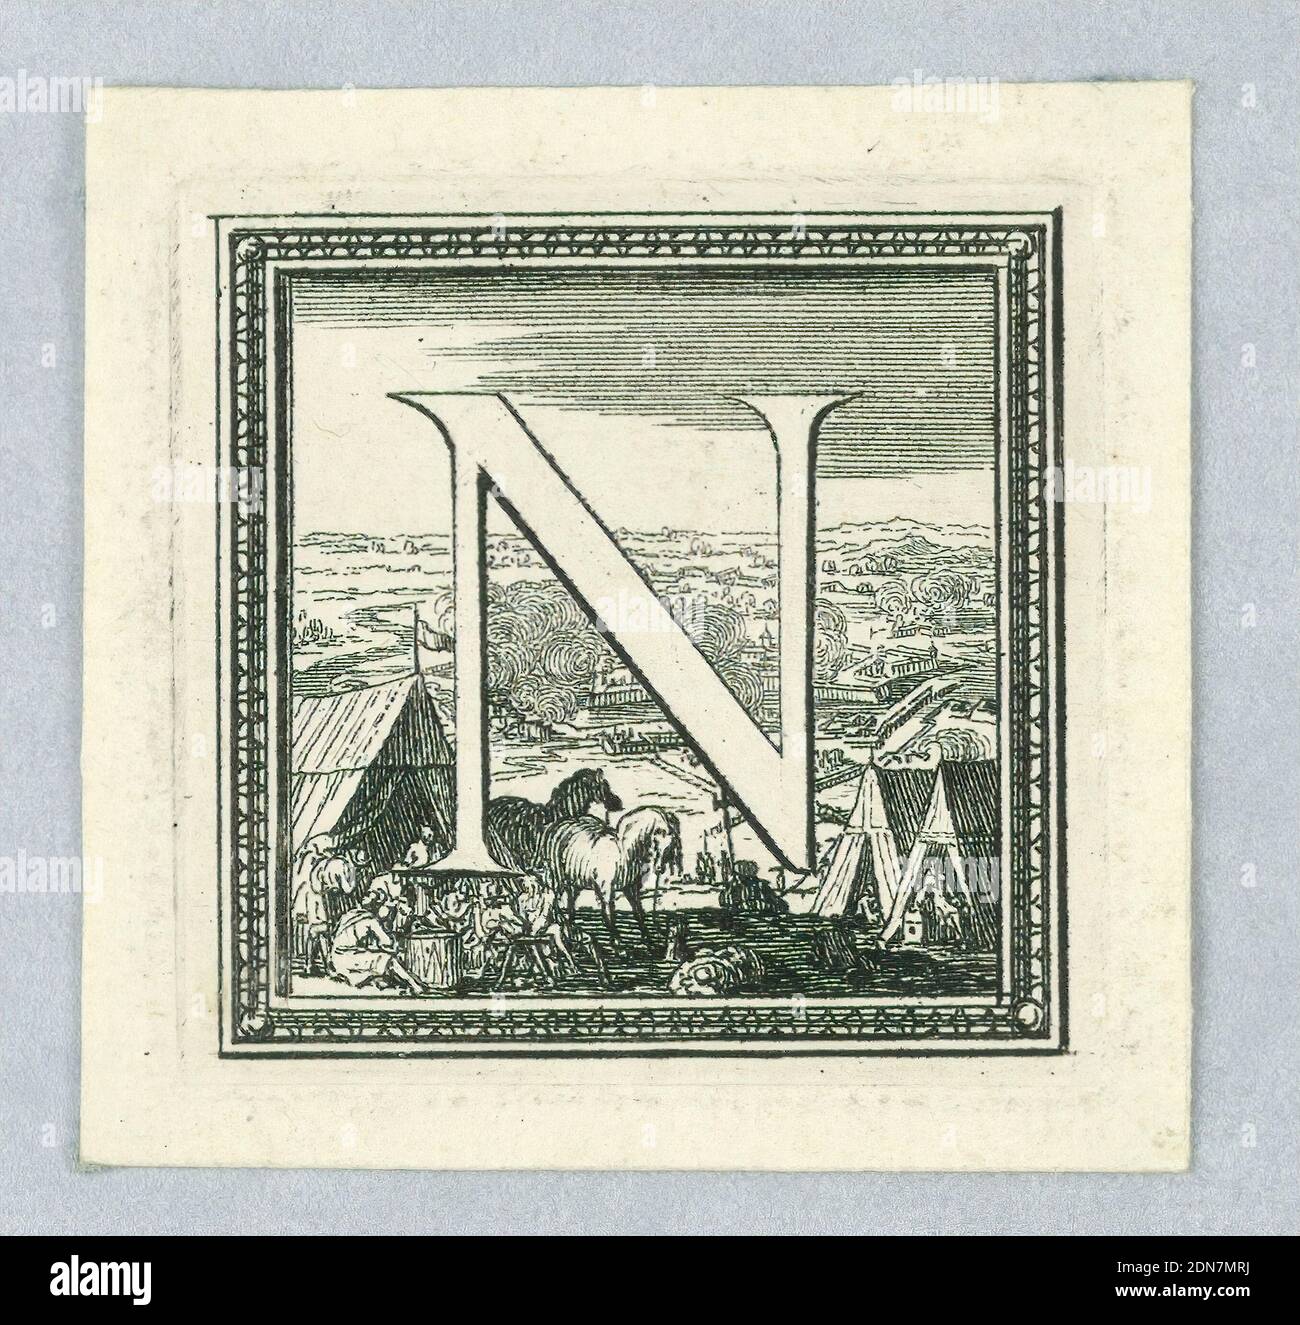 Figural Letter, Capital N from a Story of Louis XIV of France, Etching with engraving on paper, Shown against a representation of camp liffe. A town is besieged in the distance. Moulded frame., Europe, France, ca. 1700, Print Stock Photo